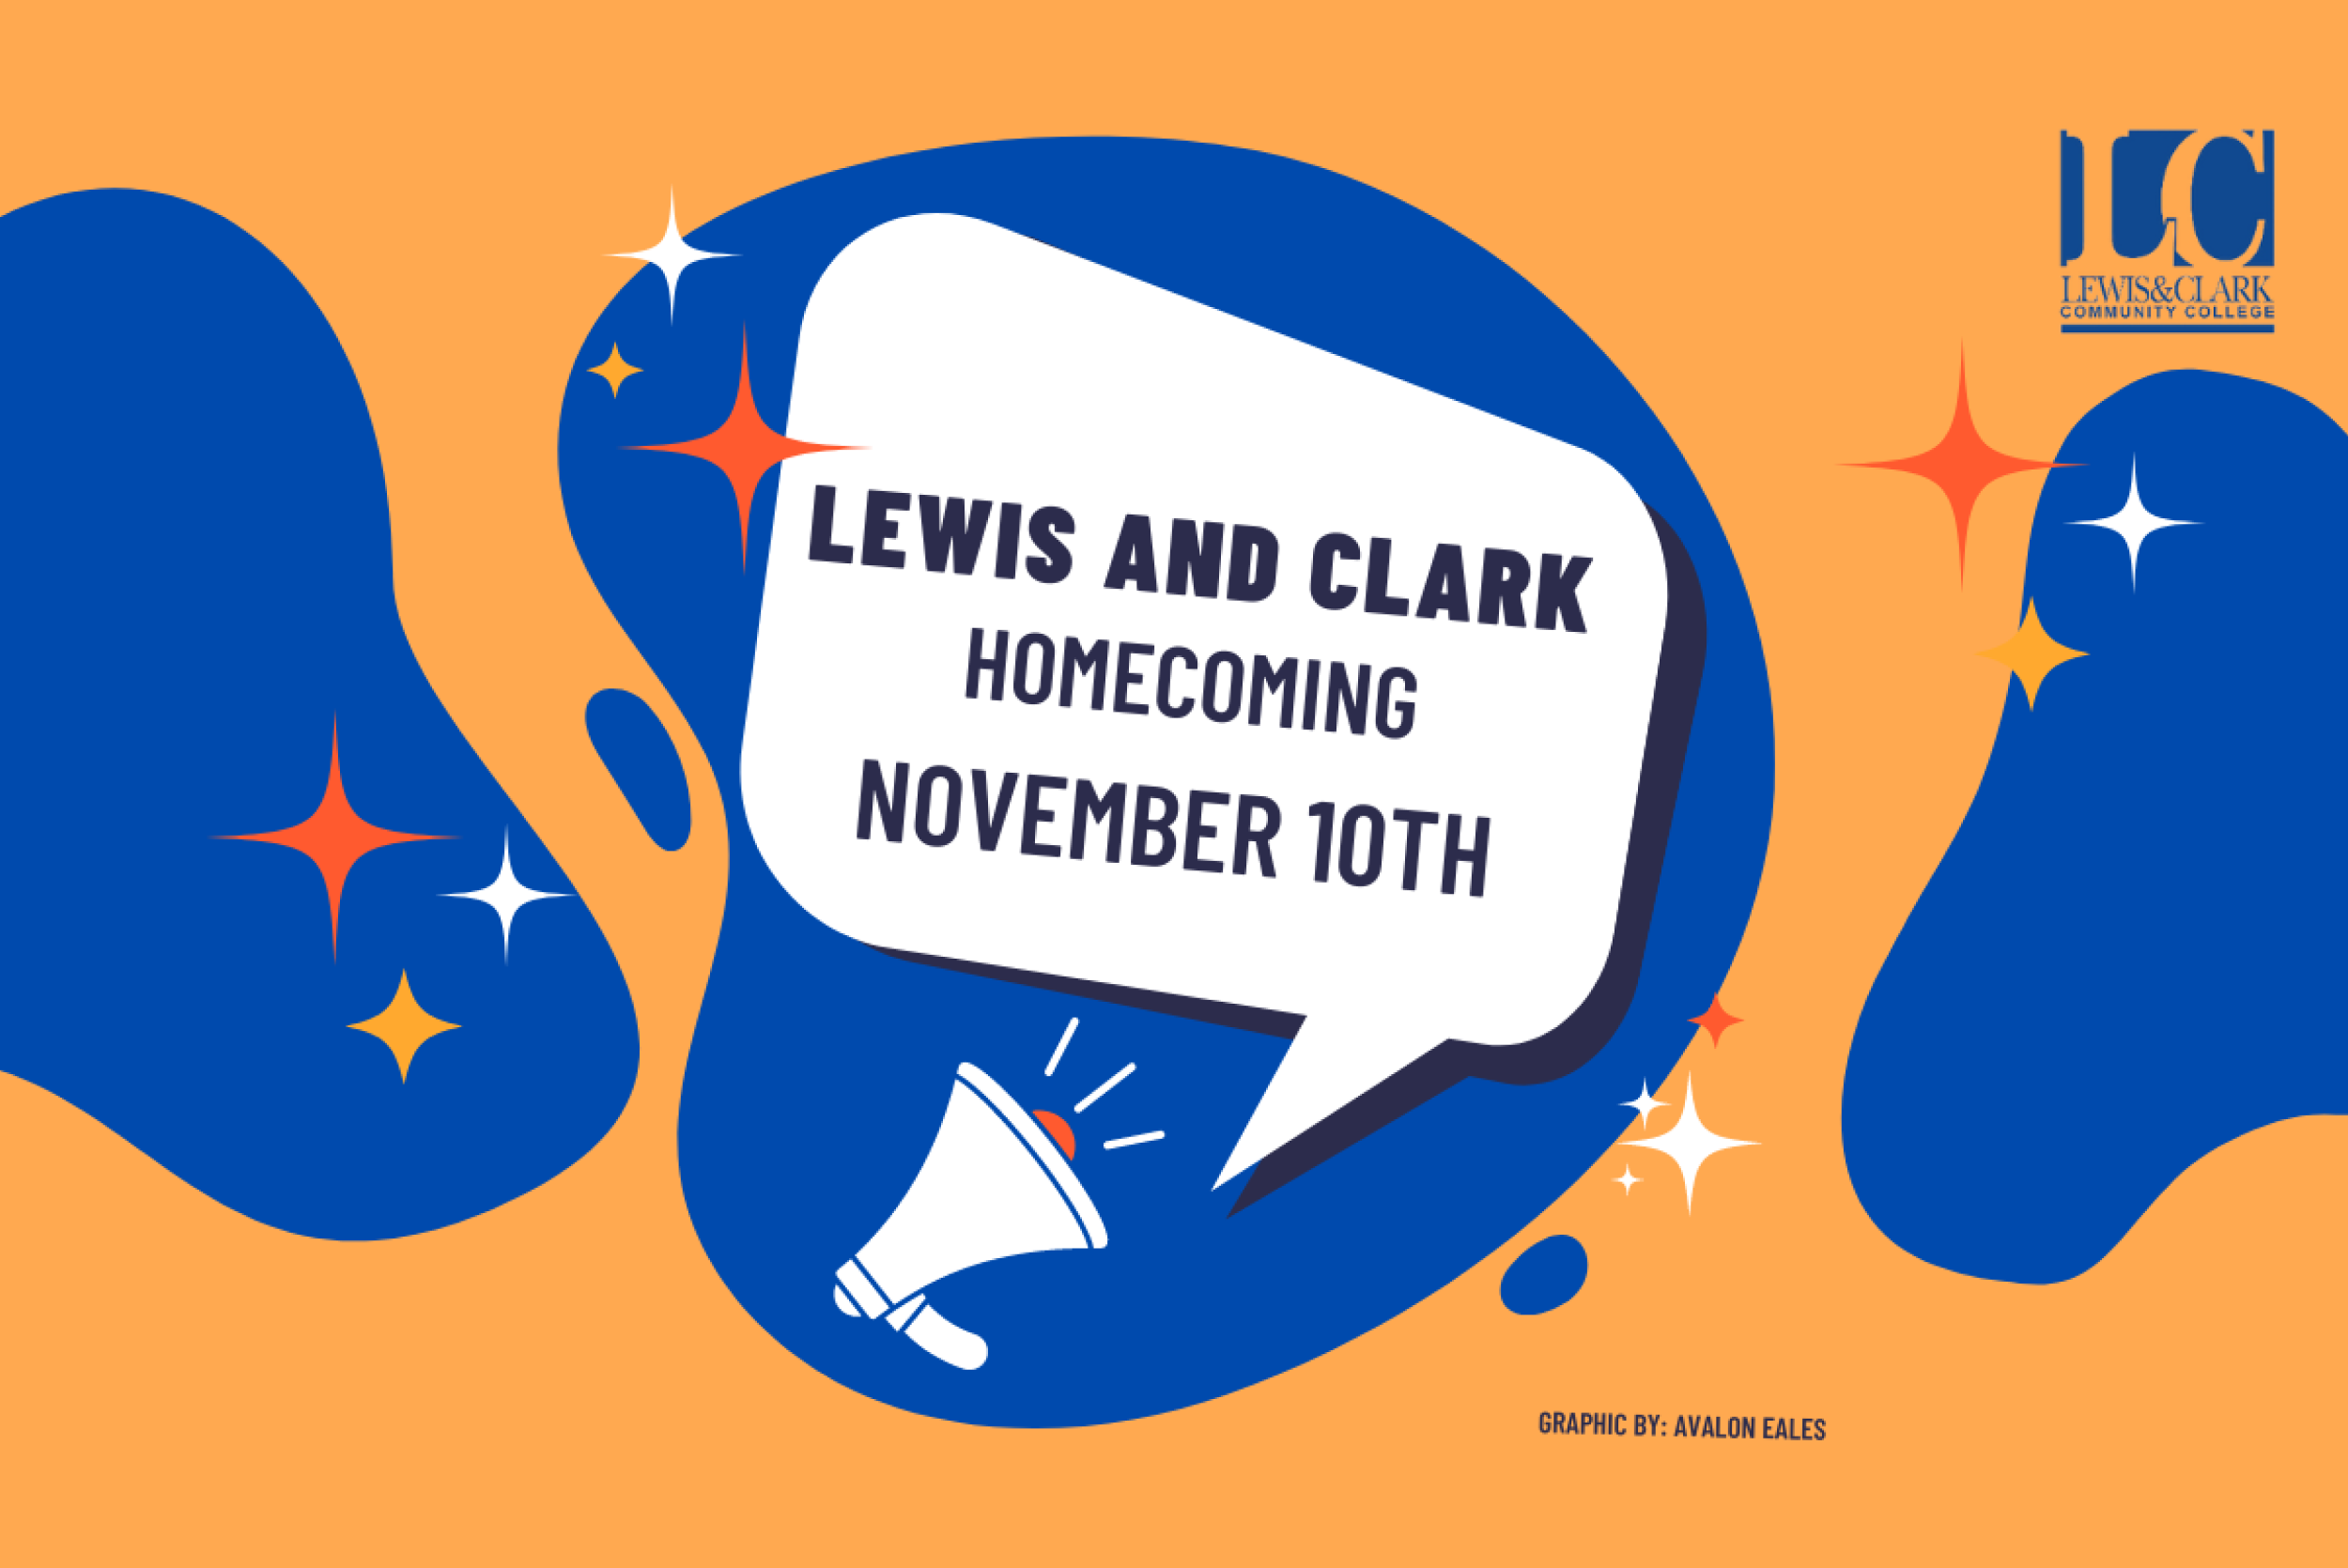 Lewis and Clark Homecoming Graphic